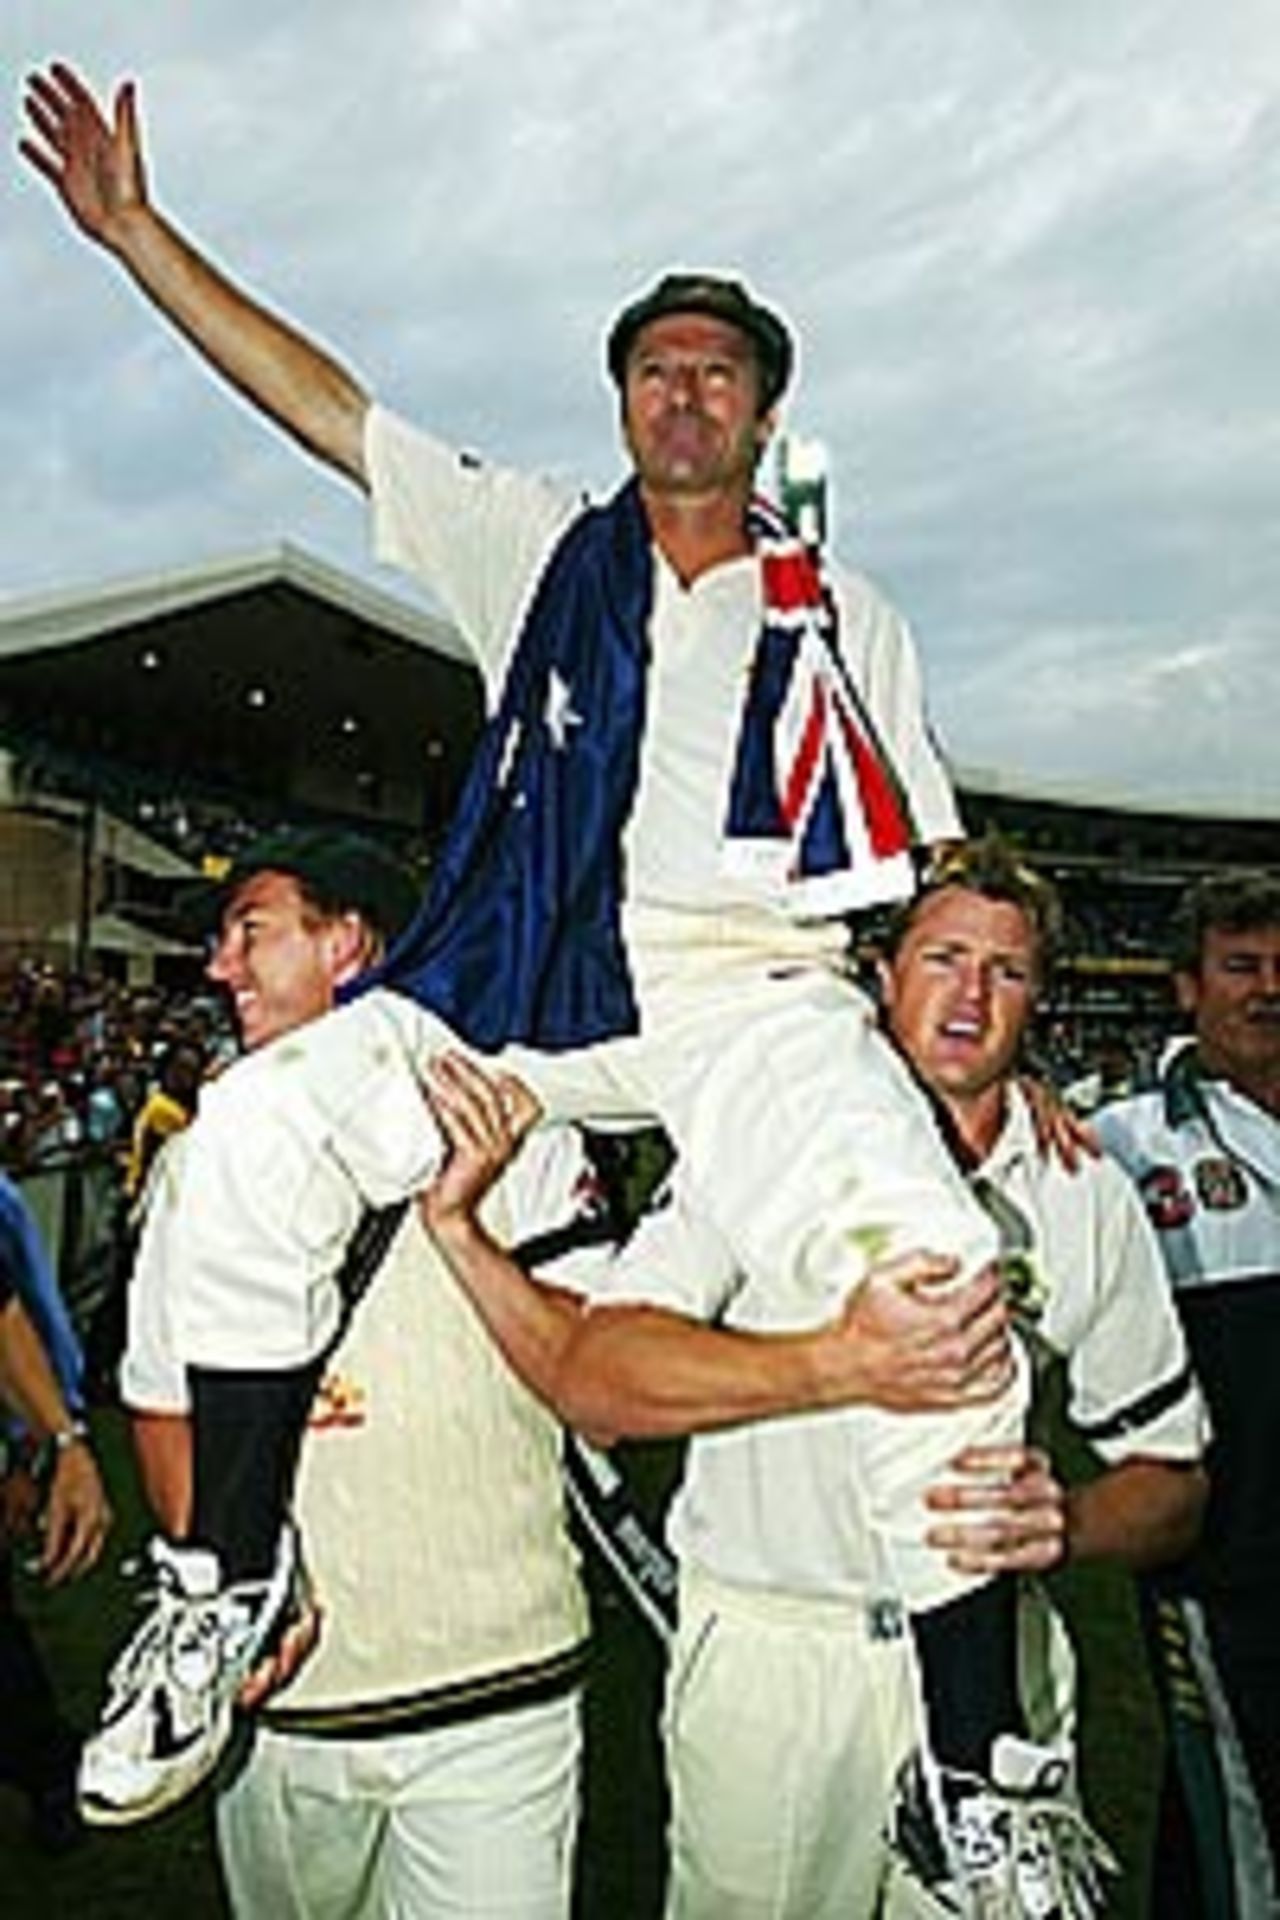 Steve Waugh is carried on the shoulders of his team-mates, Australia v India, 4th Test, Sydney, 5th day, January 6, 2004